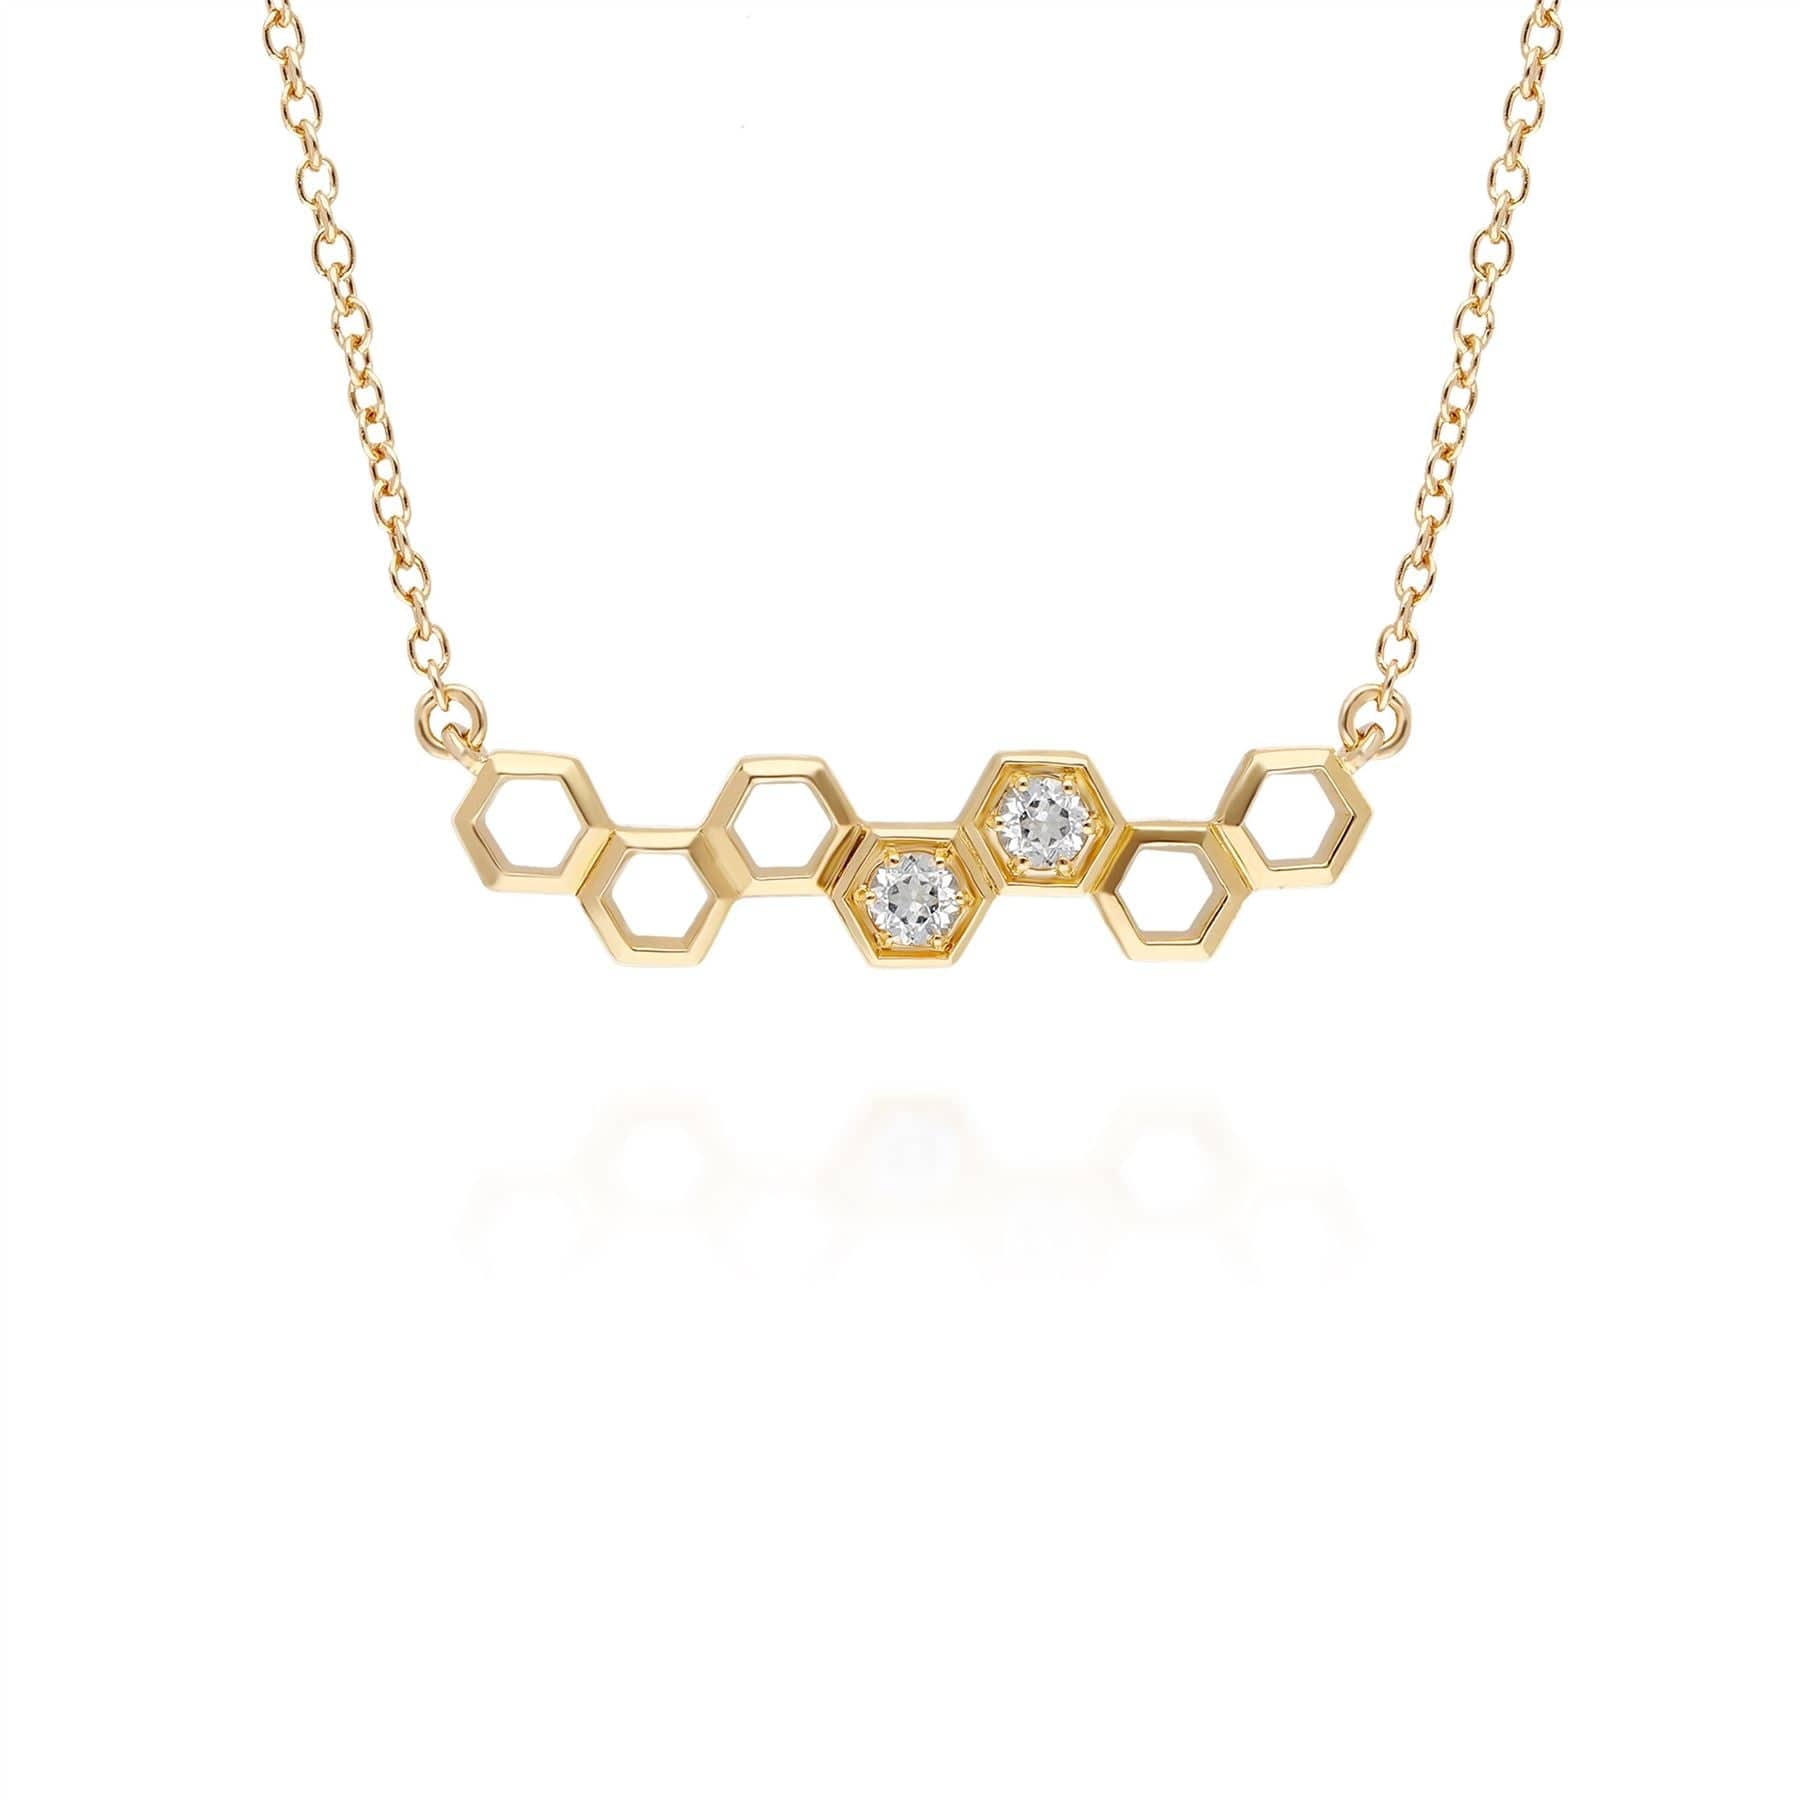 Image of Honeycomb Inspired White Topaz Link Necklace in 9ct Gold